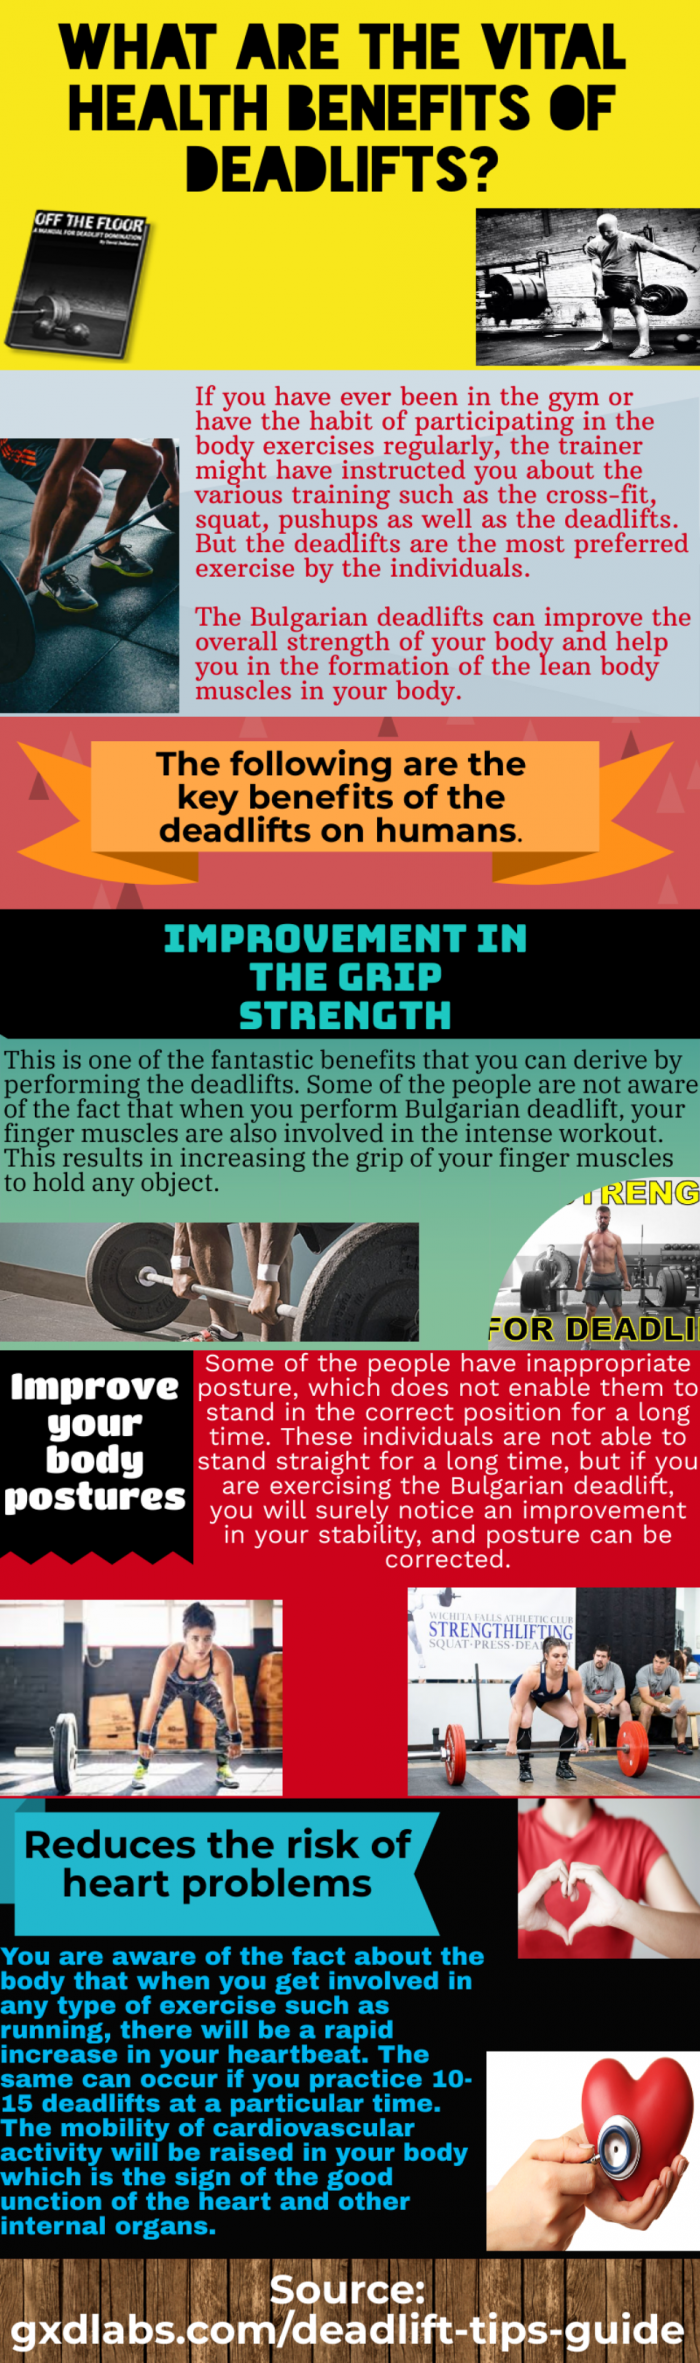 How to get the best deadlift tips